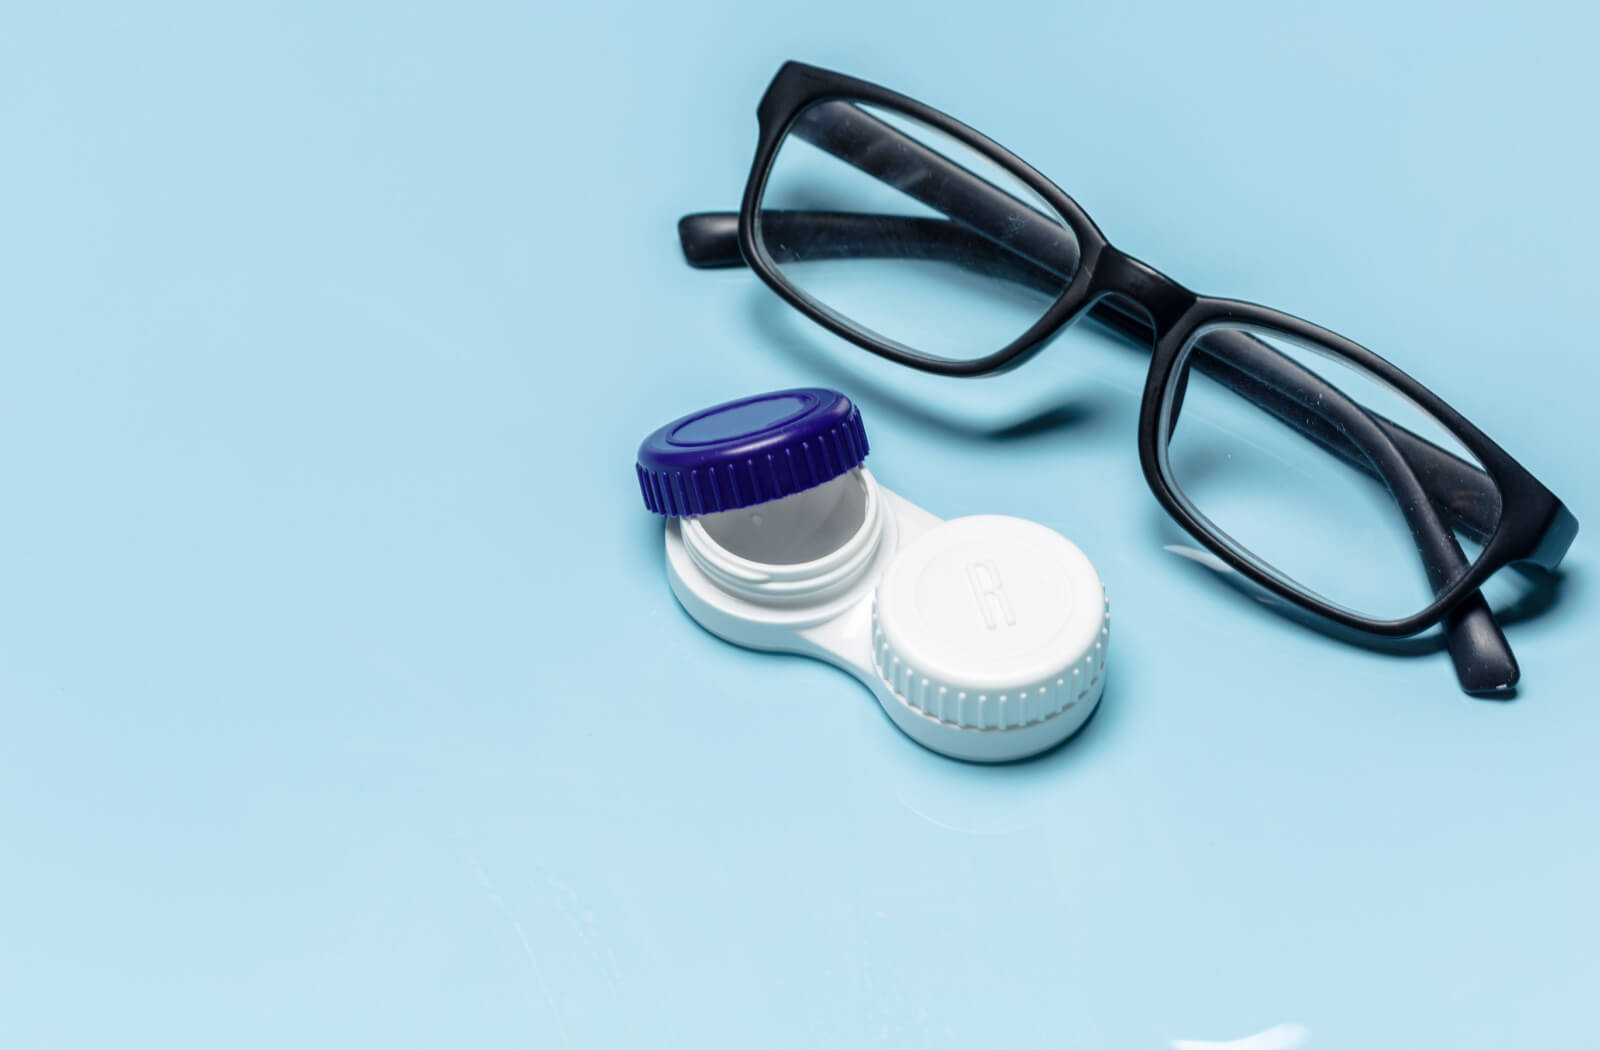 A pair of eyeglasses beside a partially opened contact lens case against a blue background.